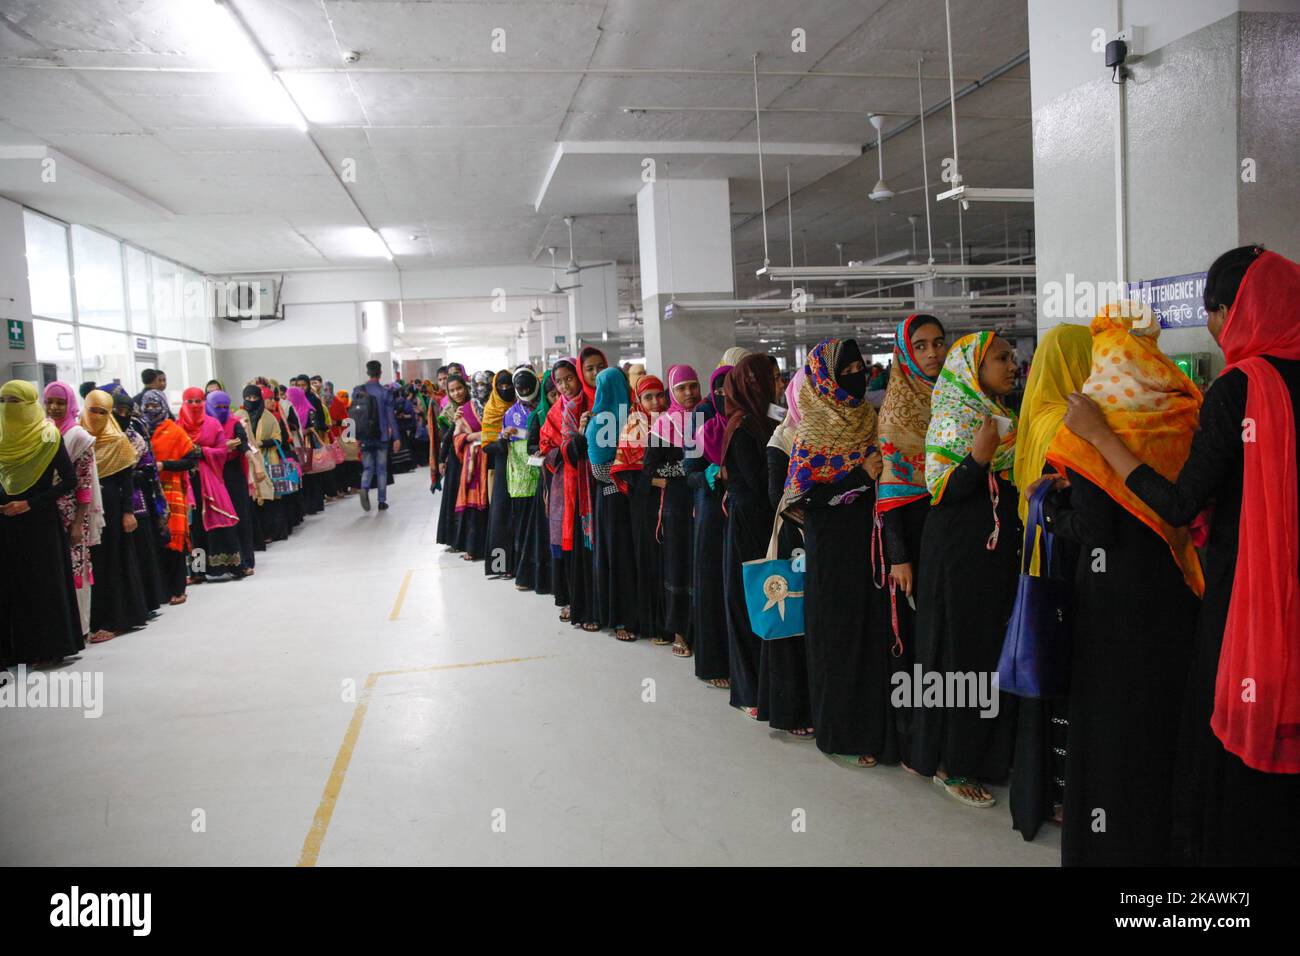 Bangladeshi female workers attend at their garments factory for work in Gazipur outskirts of Dhaka on February 17, 2018. The garment sector has provided employment opportunities to women from the rural areas that previously did not have any opportunity to be part of the formal workforce. This has given women the chance to be financially independent and have a voice in the family because now they contribute financially.However, women workers face problems. Most women come from low income families. Low wage of women workers and their compliance have enabled the industry to compete with the world Stock Photo